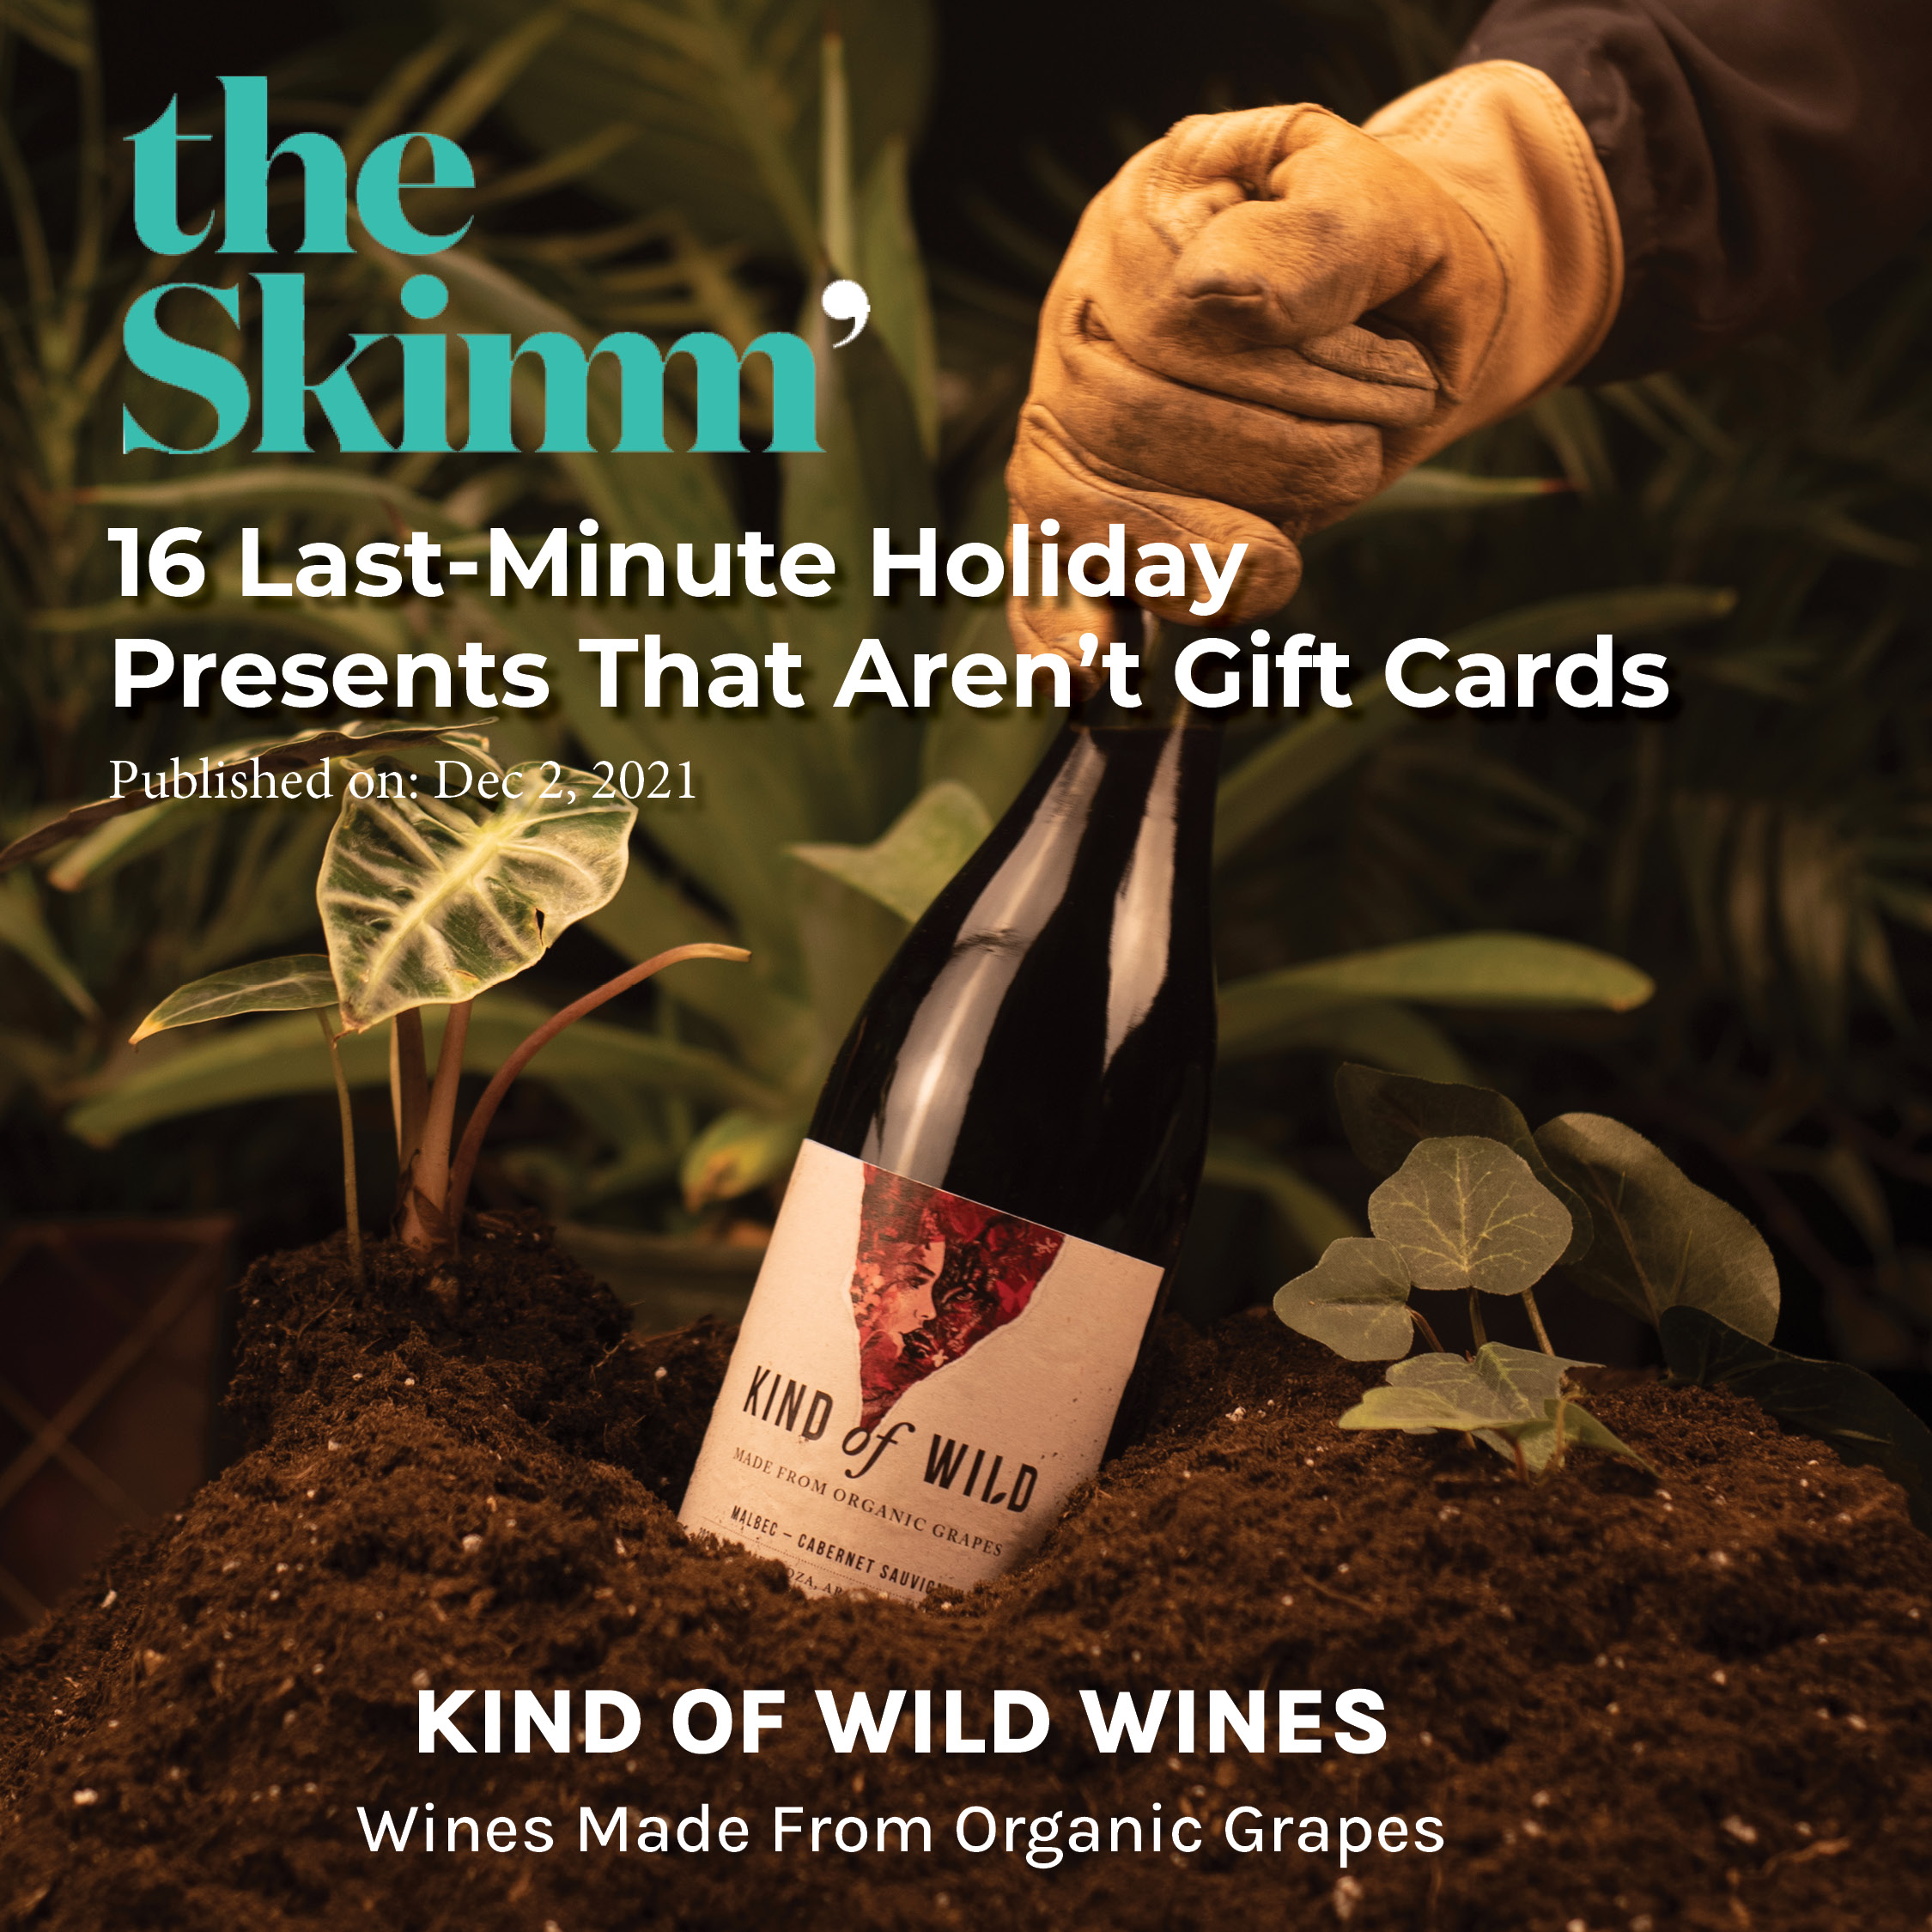 16 Last-Minute Holiday Presents That Aren’t Gift Cards – The Skimm